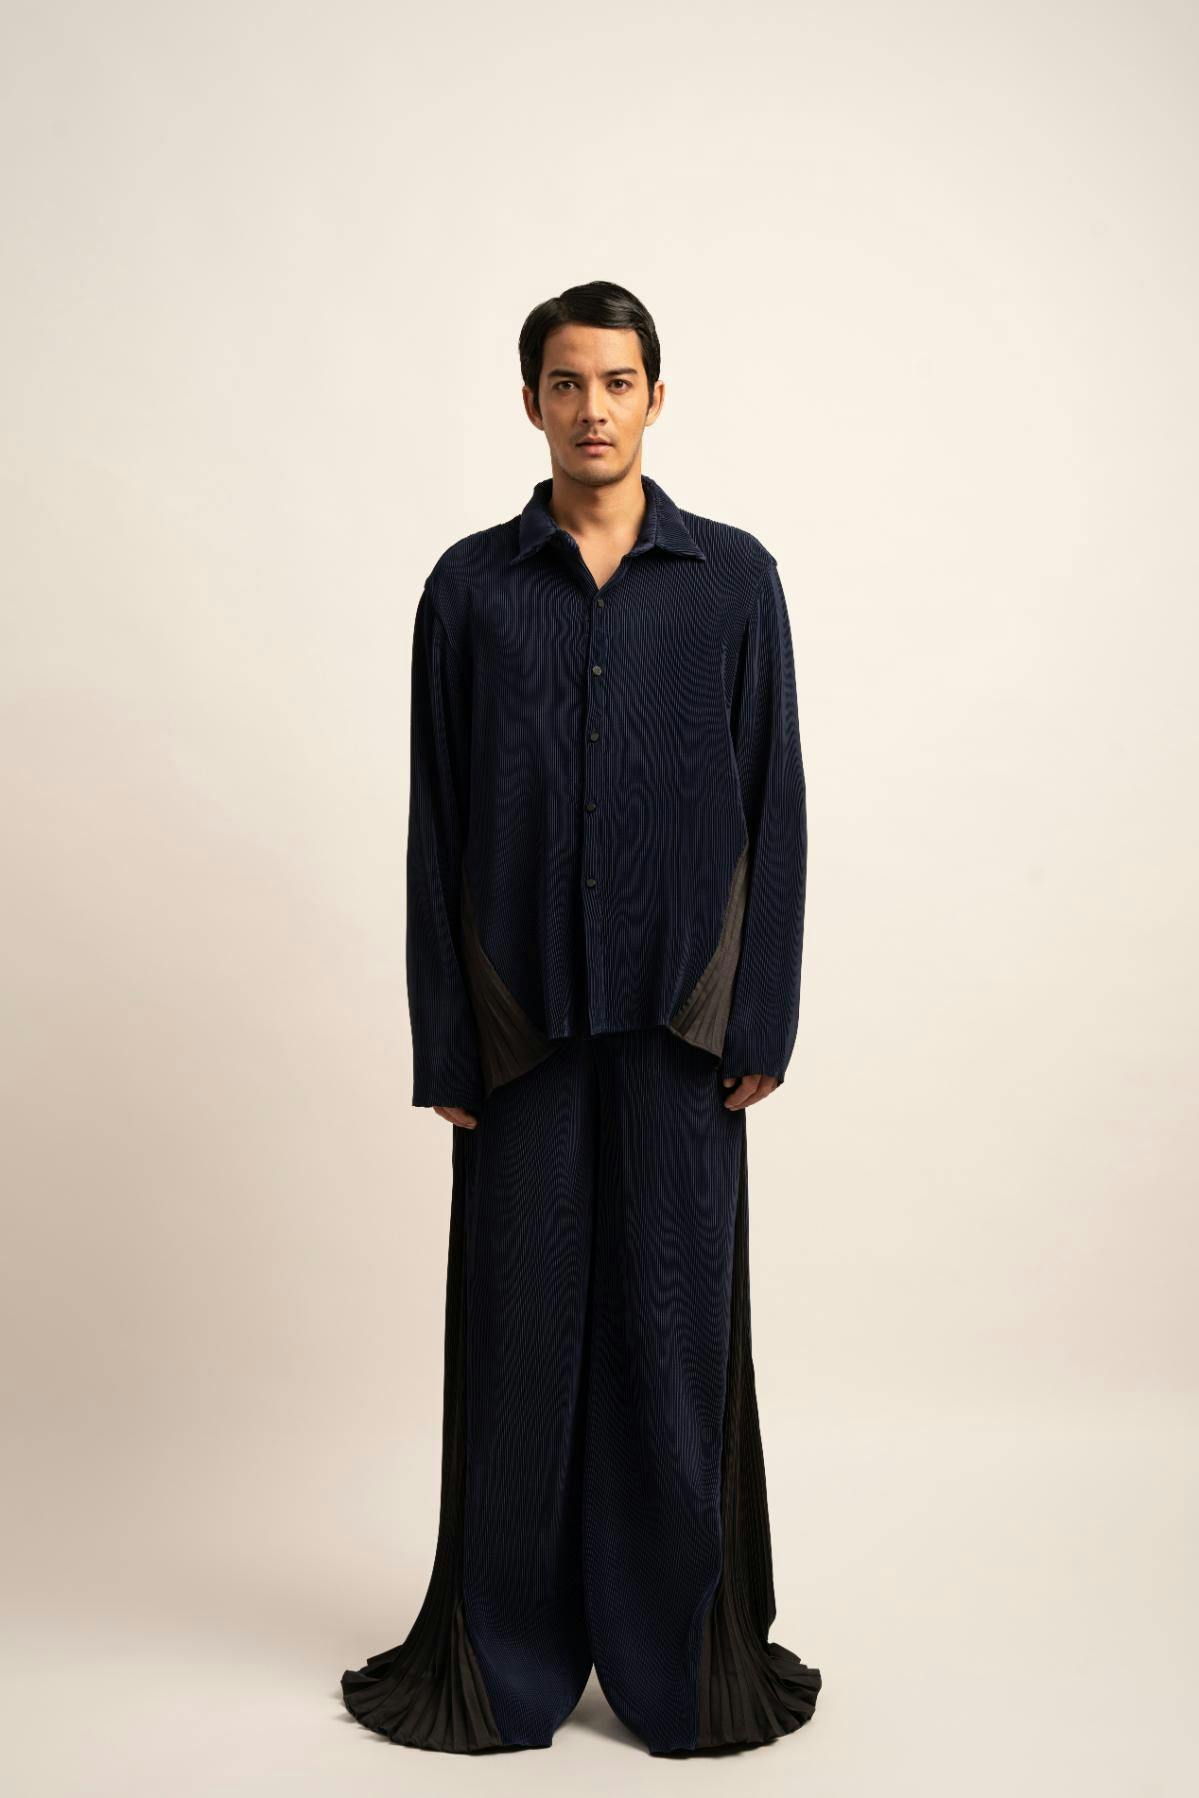 The Synthwave Trousers, a product by Siddhant Agrawal Label